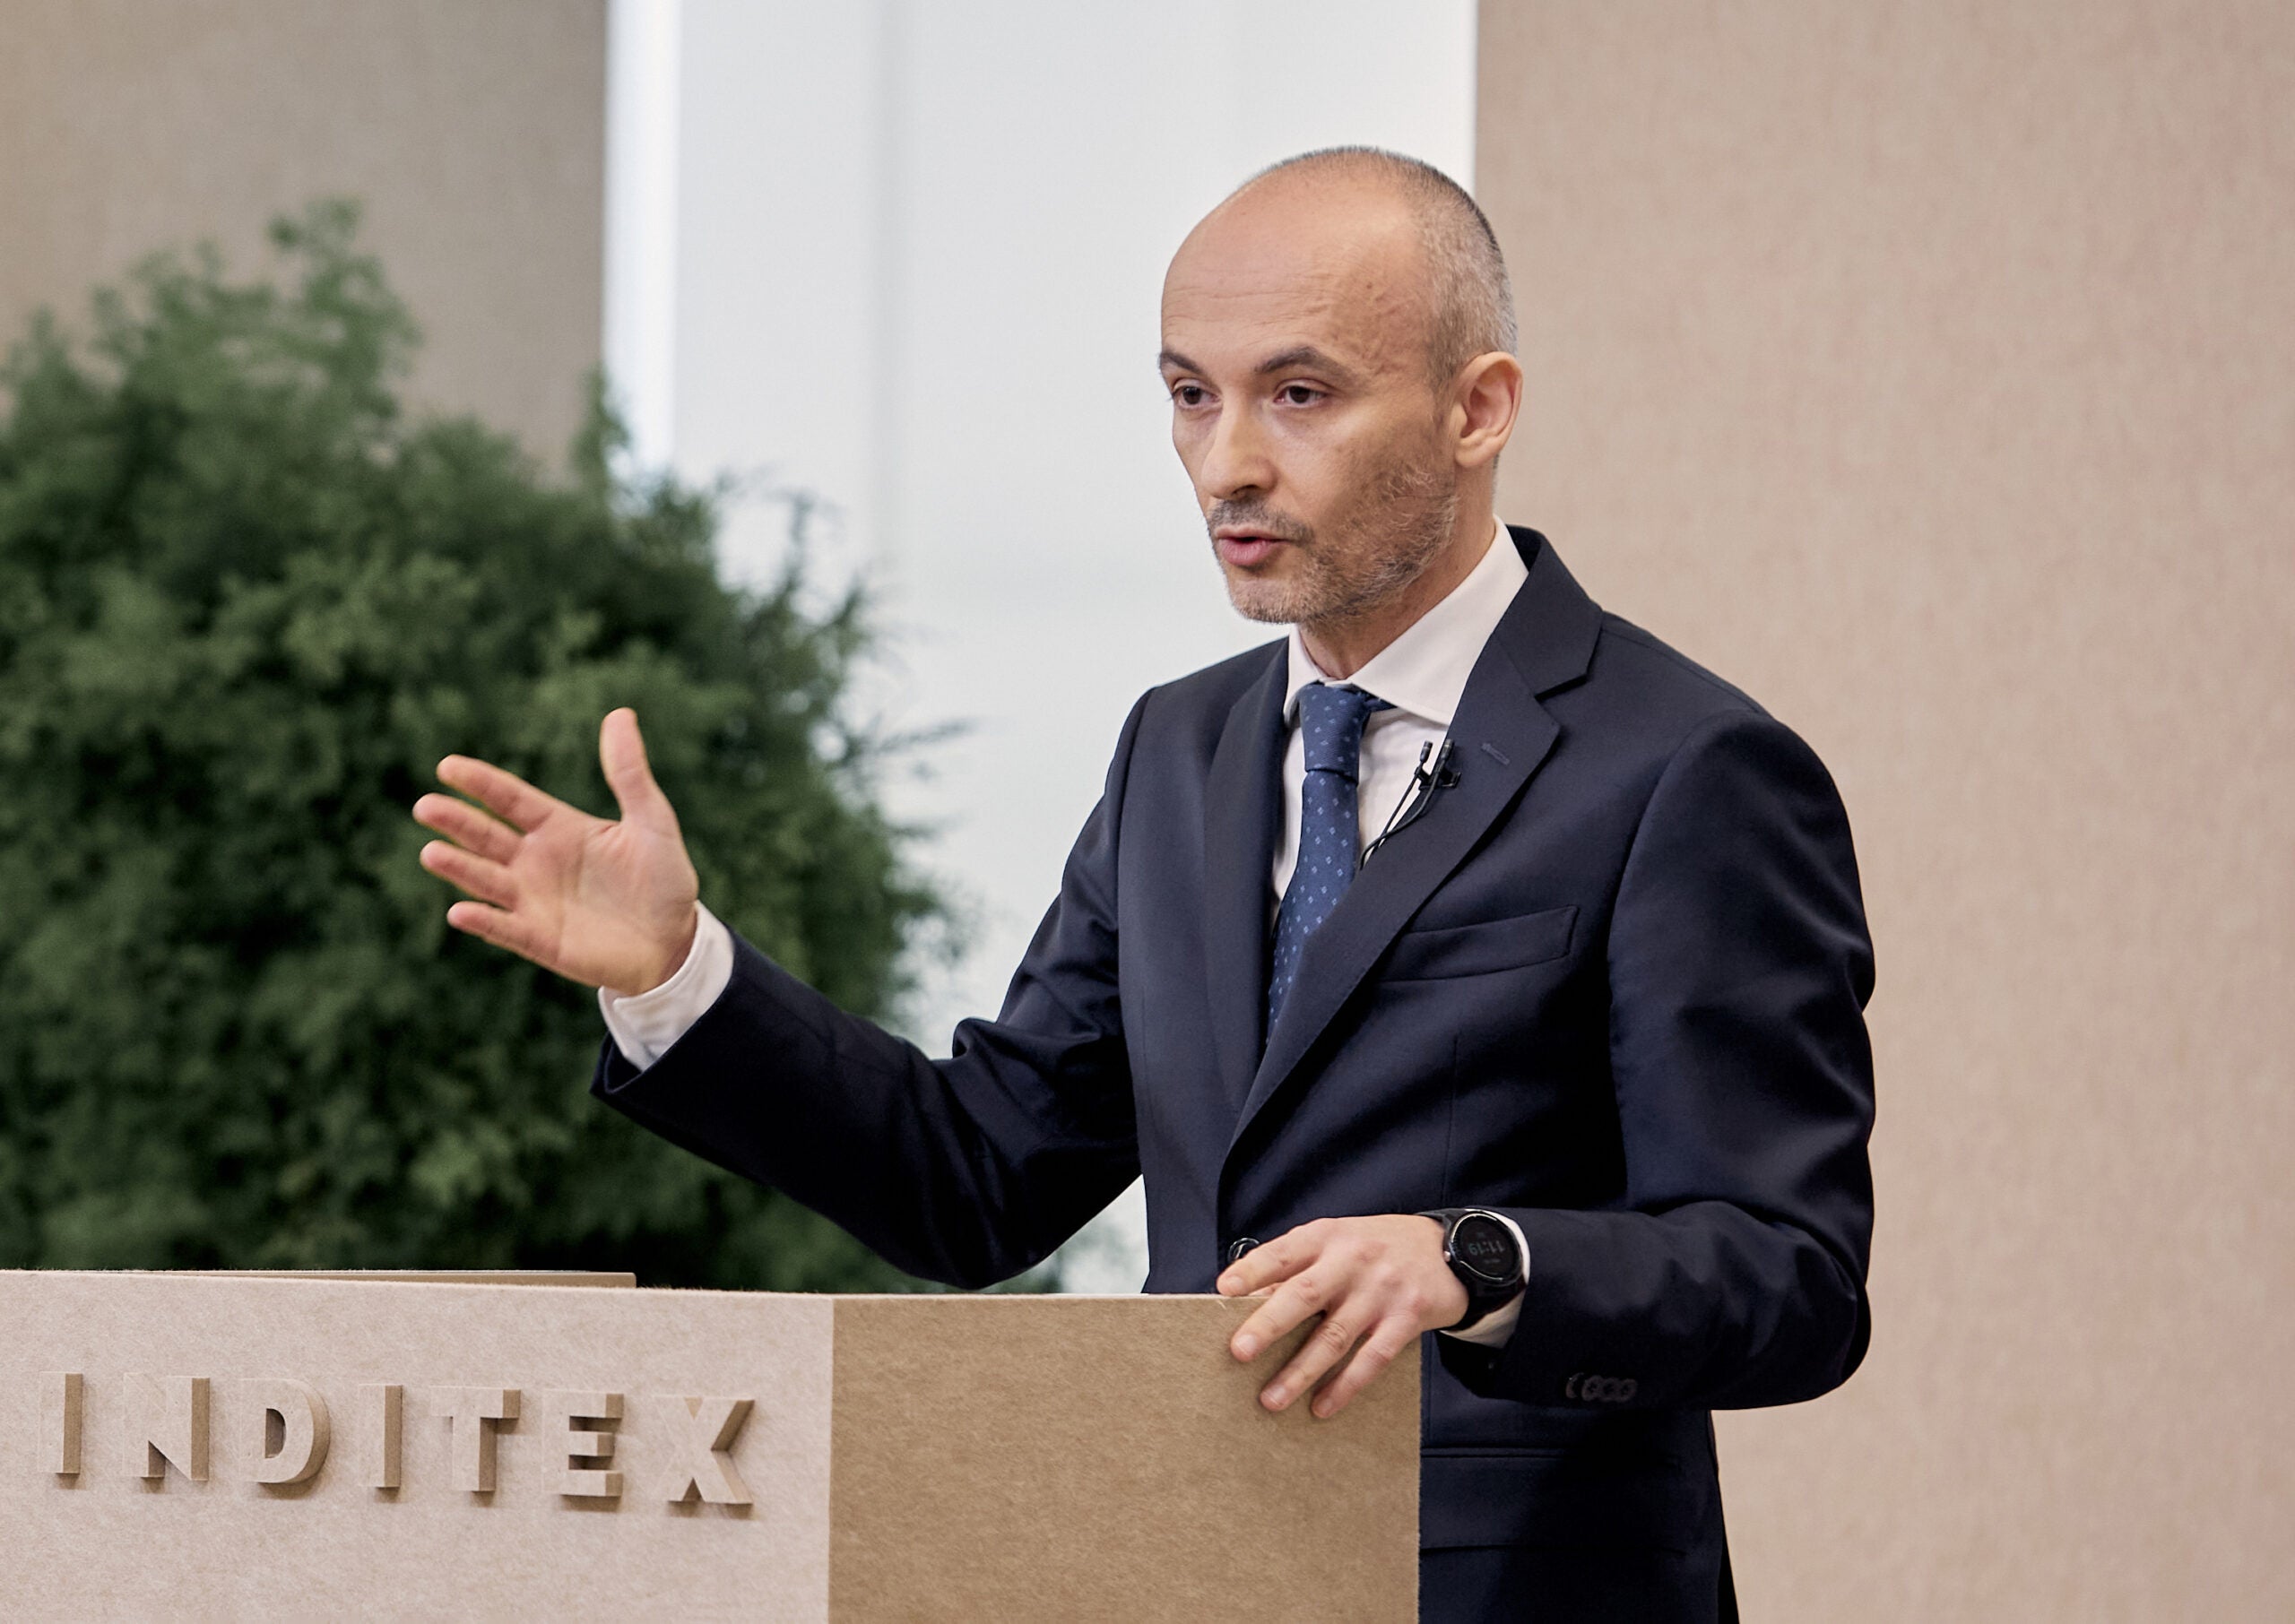 Inditex posts 36% growth in revenue for first quarter of FY22